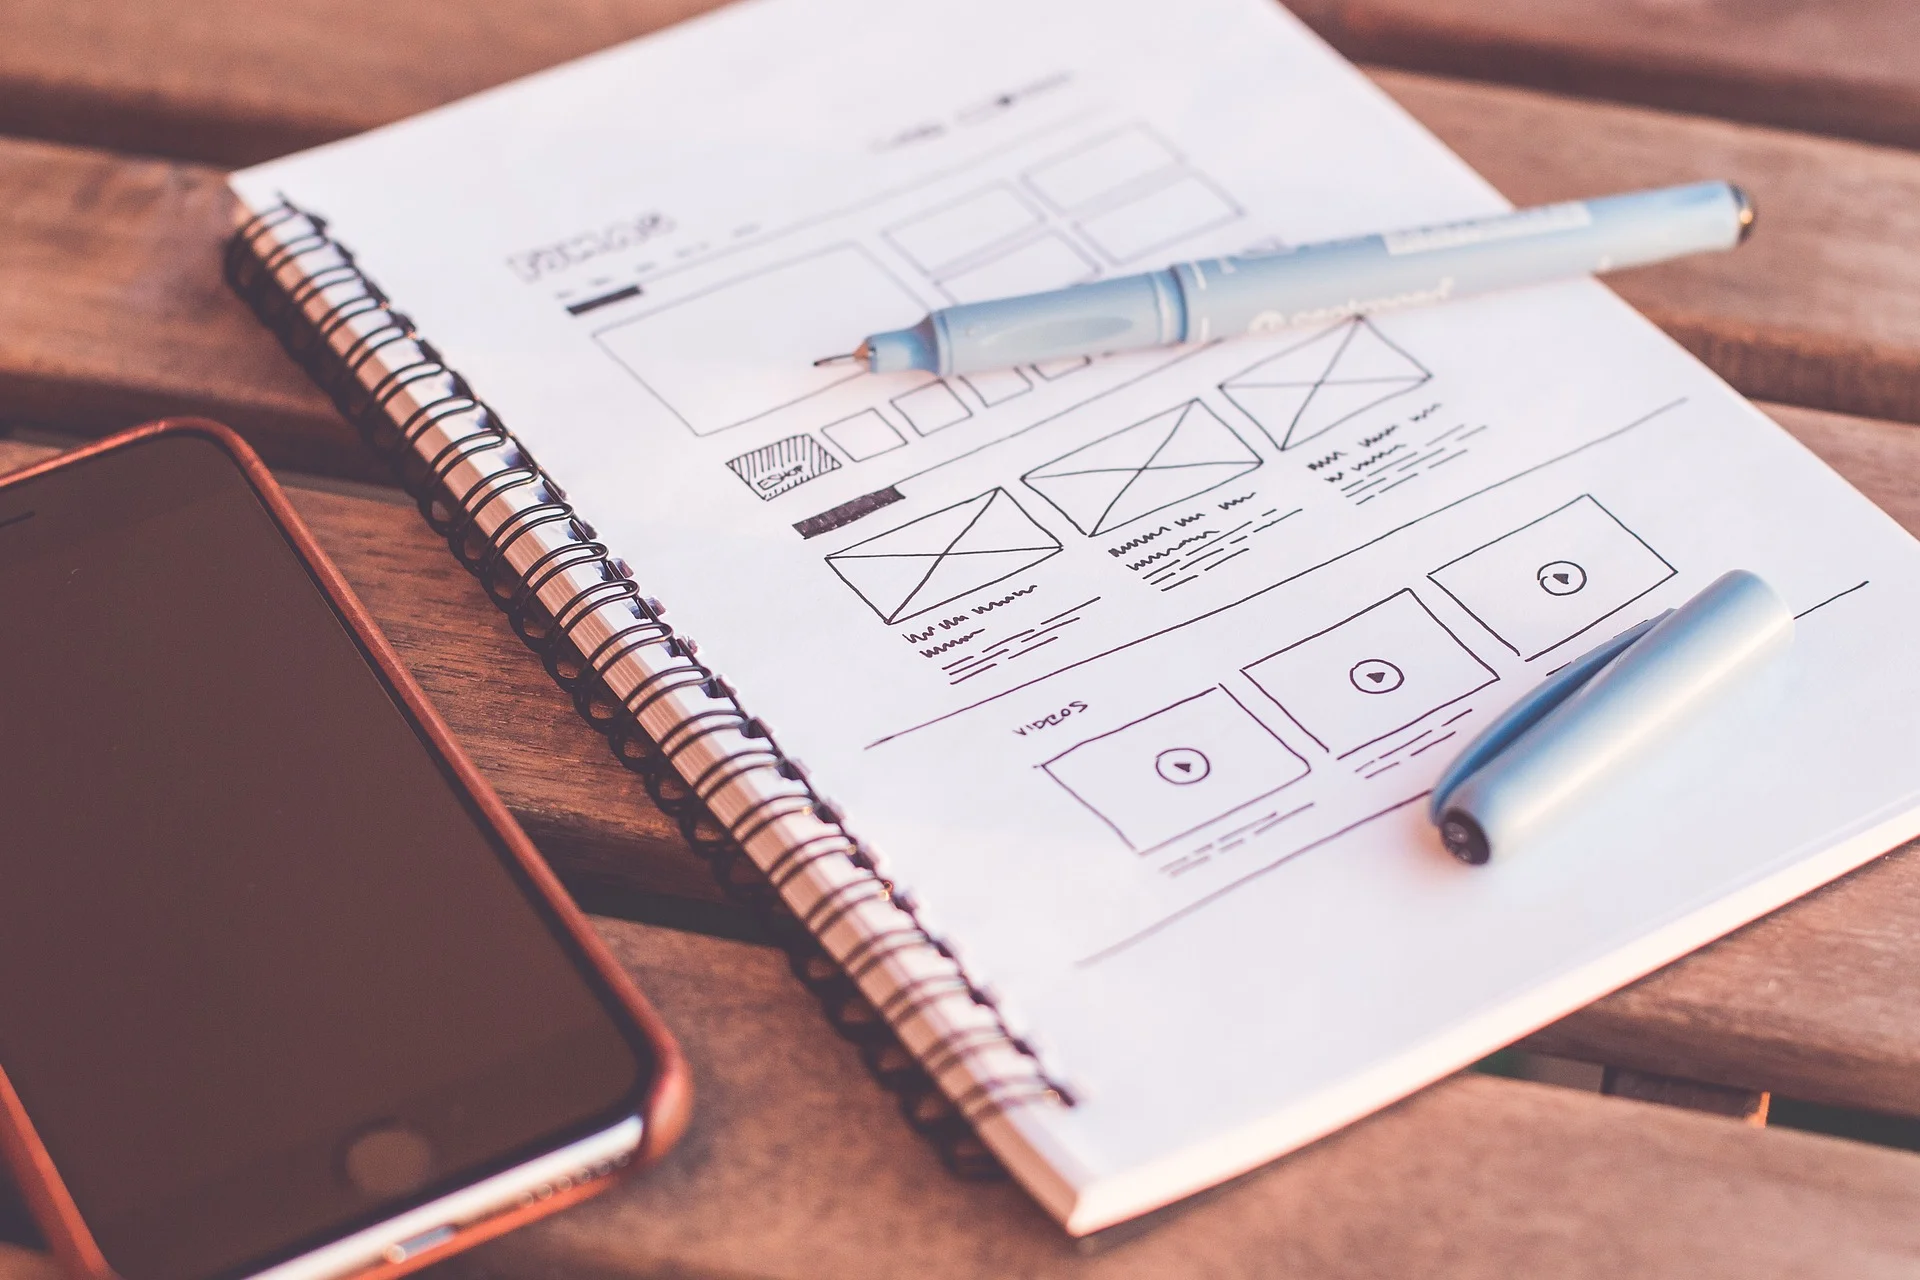 Sketch, Wireframe, Mockup, and Prototype: Why, When and How